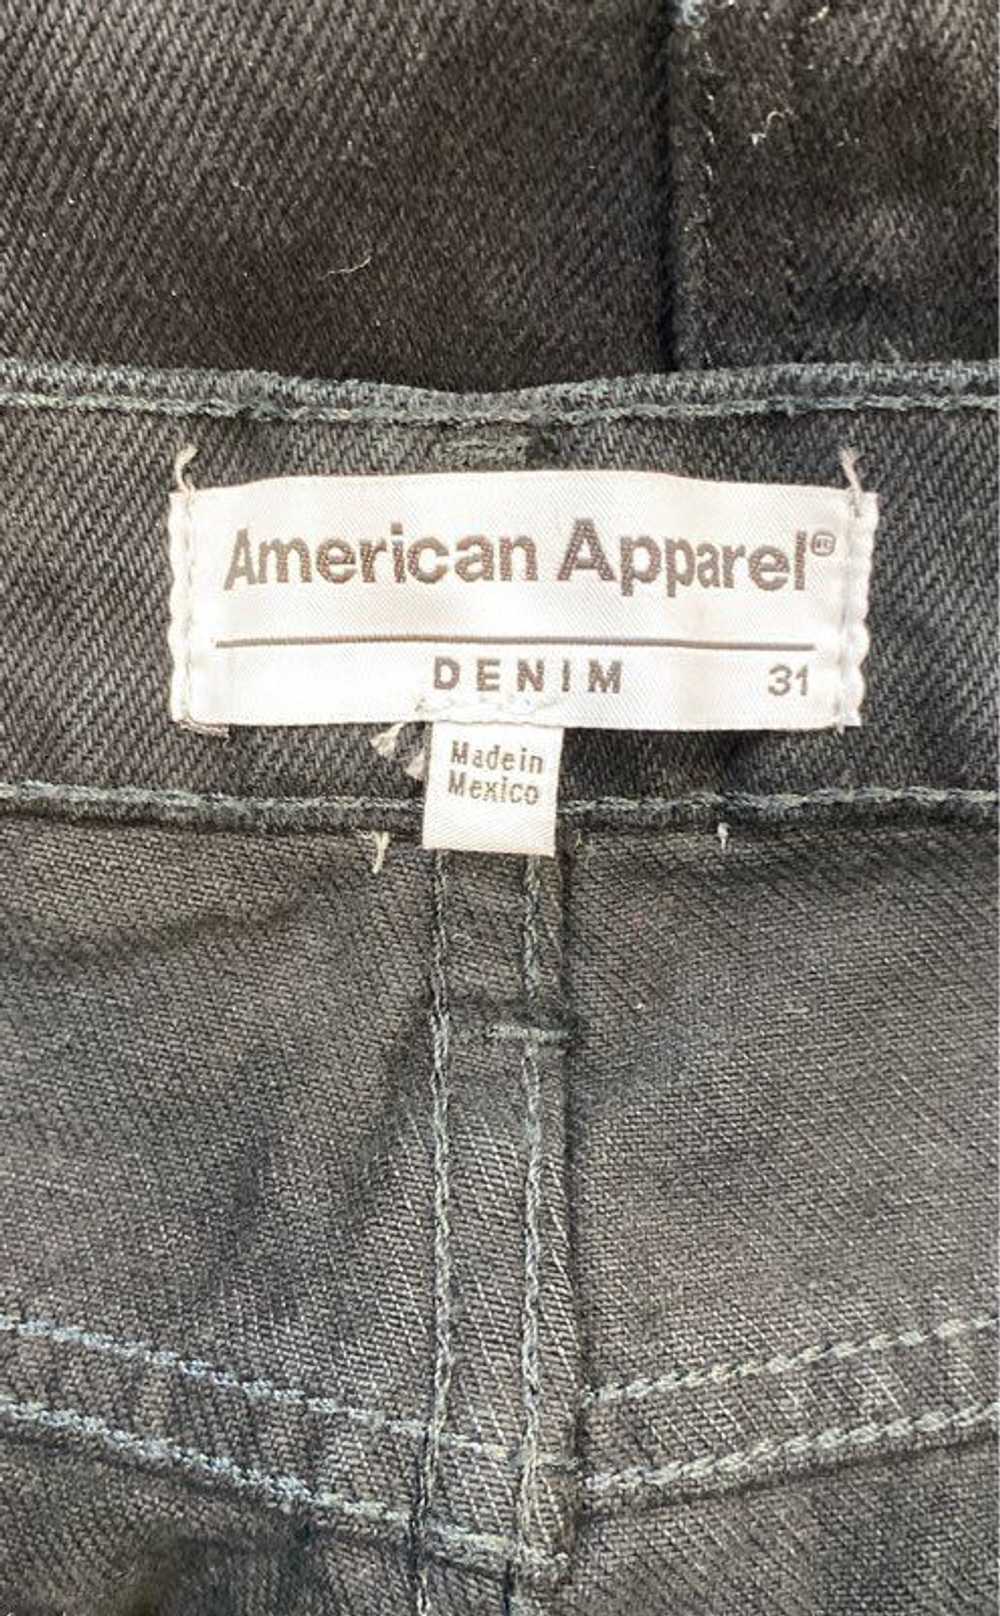 American Apparel Black Straight Jeans - Size 31 - image 3